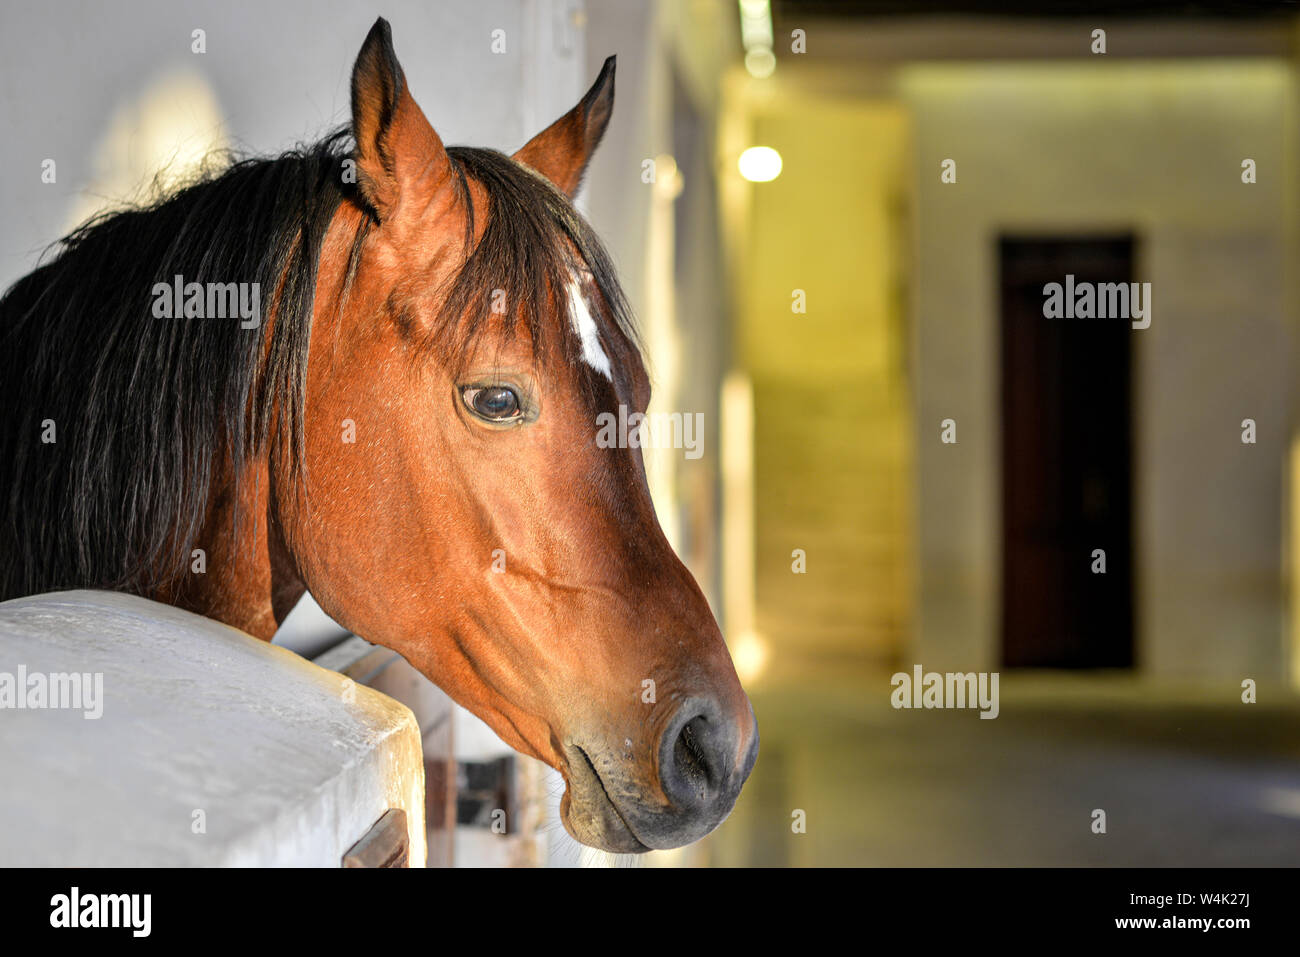 DOHA, QATAR - JANUARY 23, 2016:  Head of a brown horse taken at the stable of the Doha's old souq at the end of a winter afternoon Stock Photo